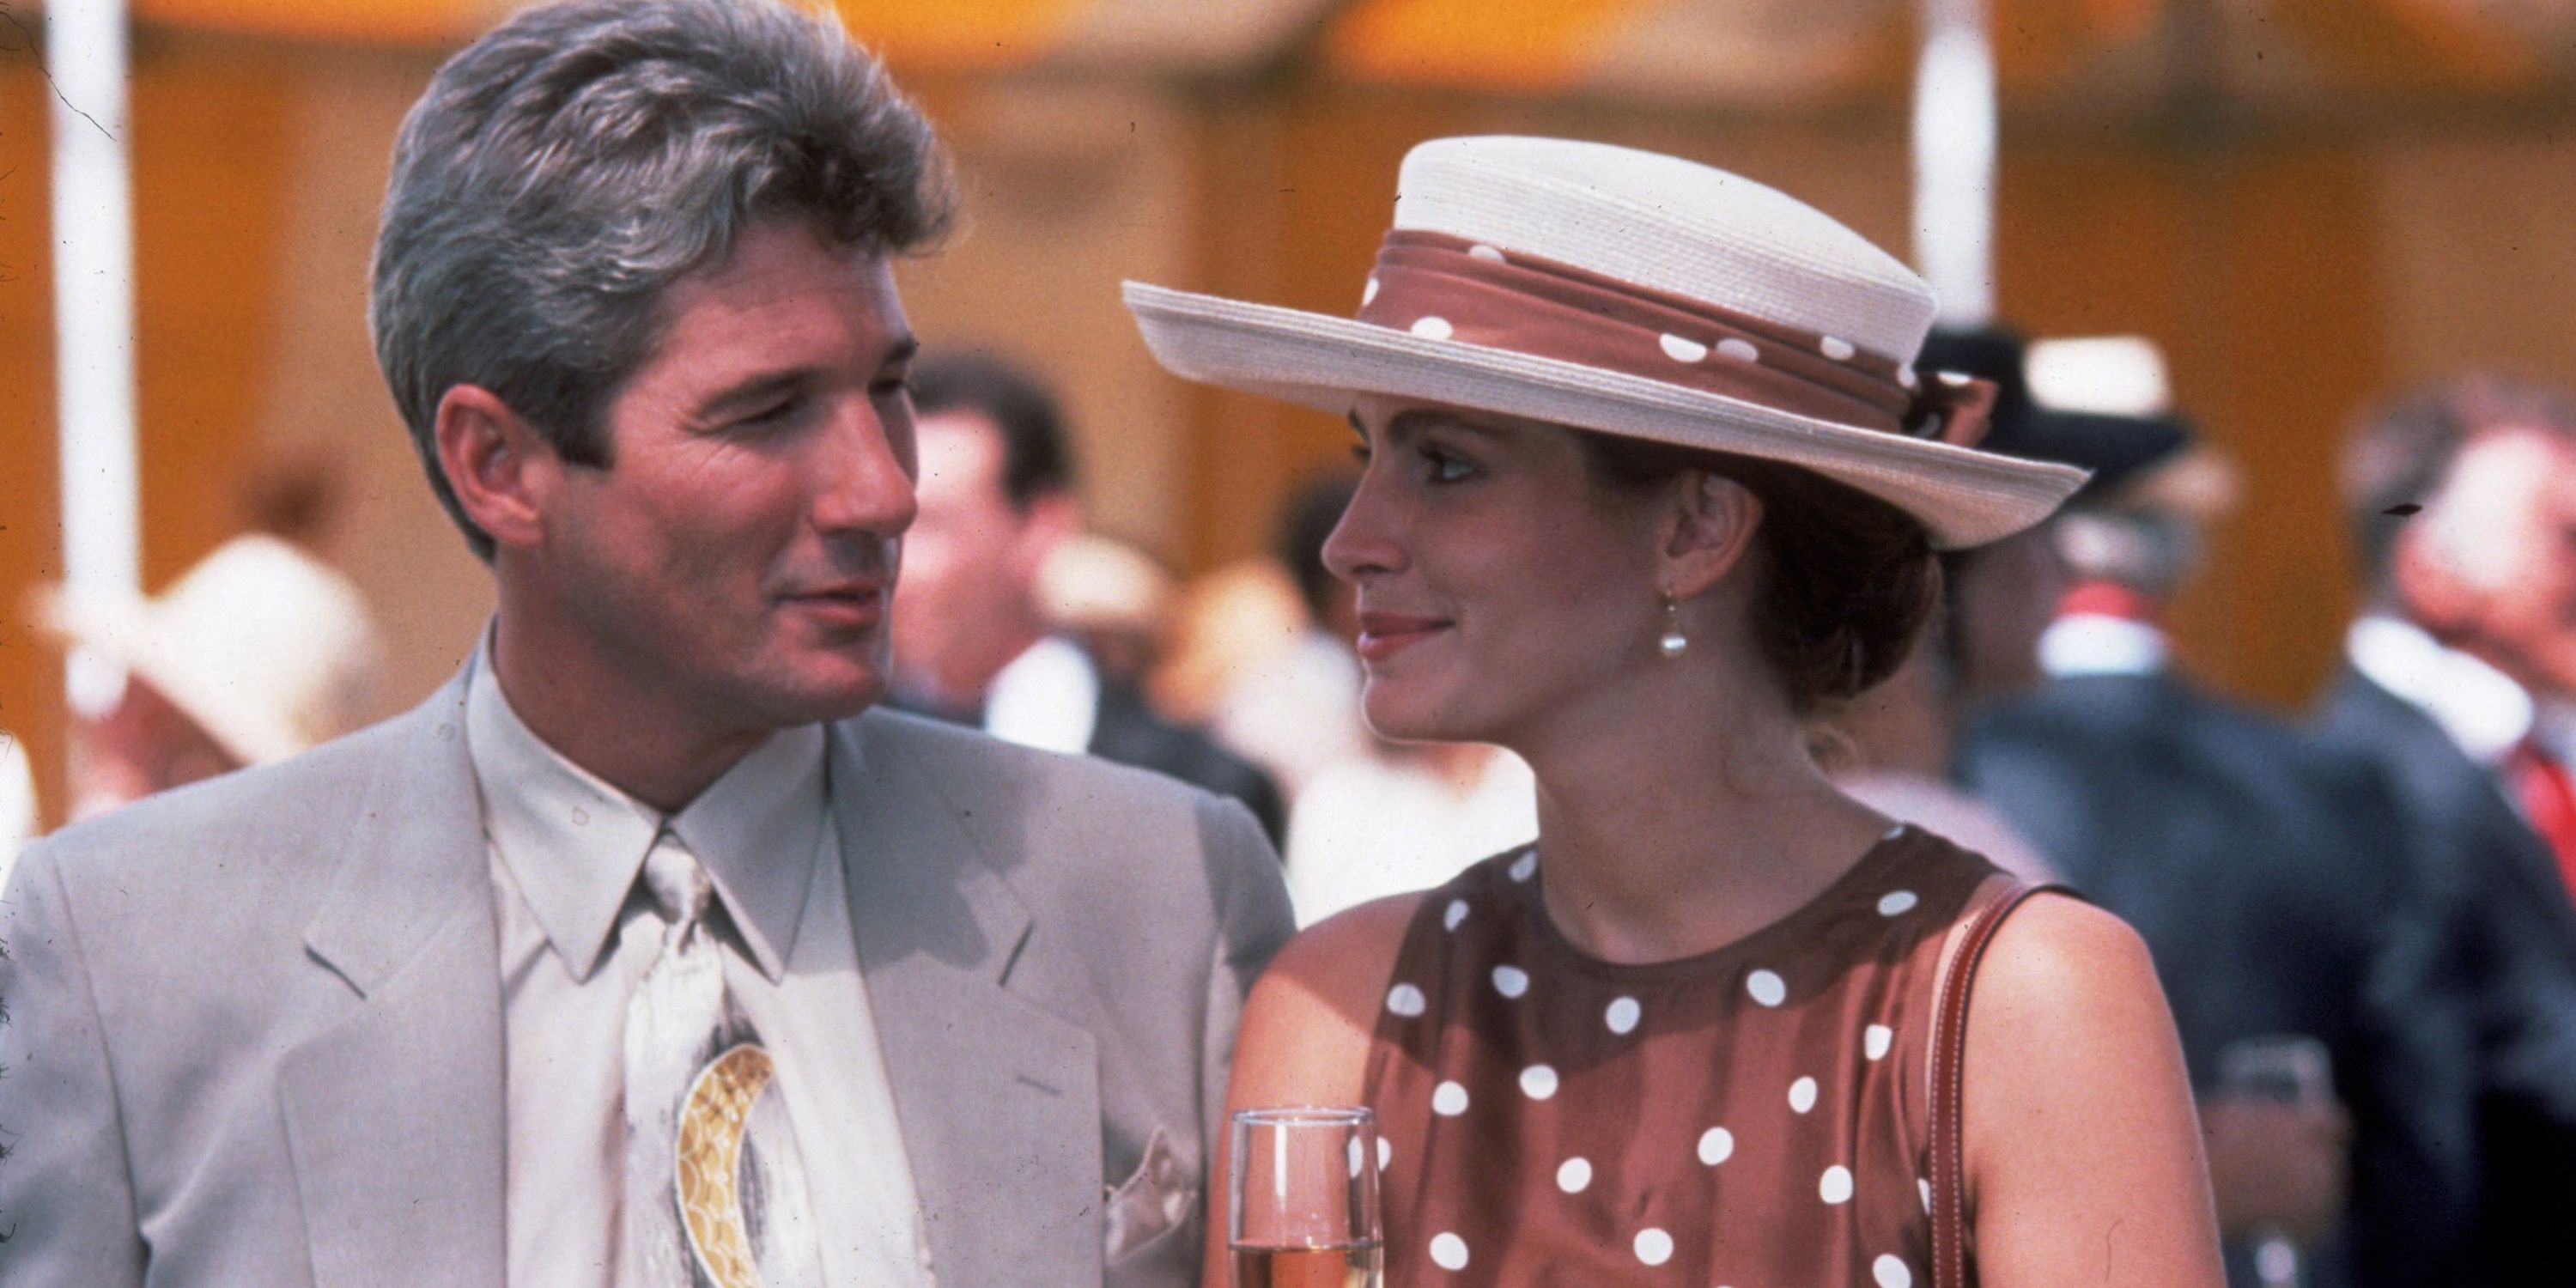 The Original Ending Of Pretty Woman Explained (And Why It Changed)